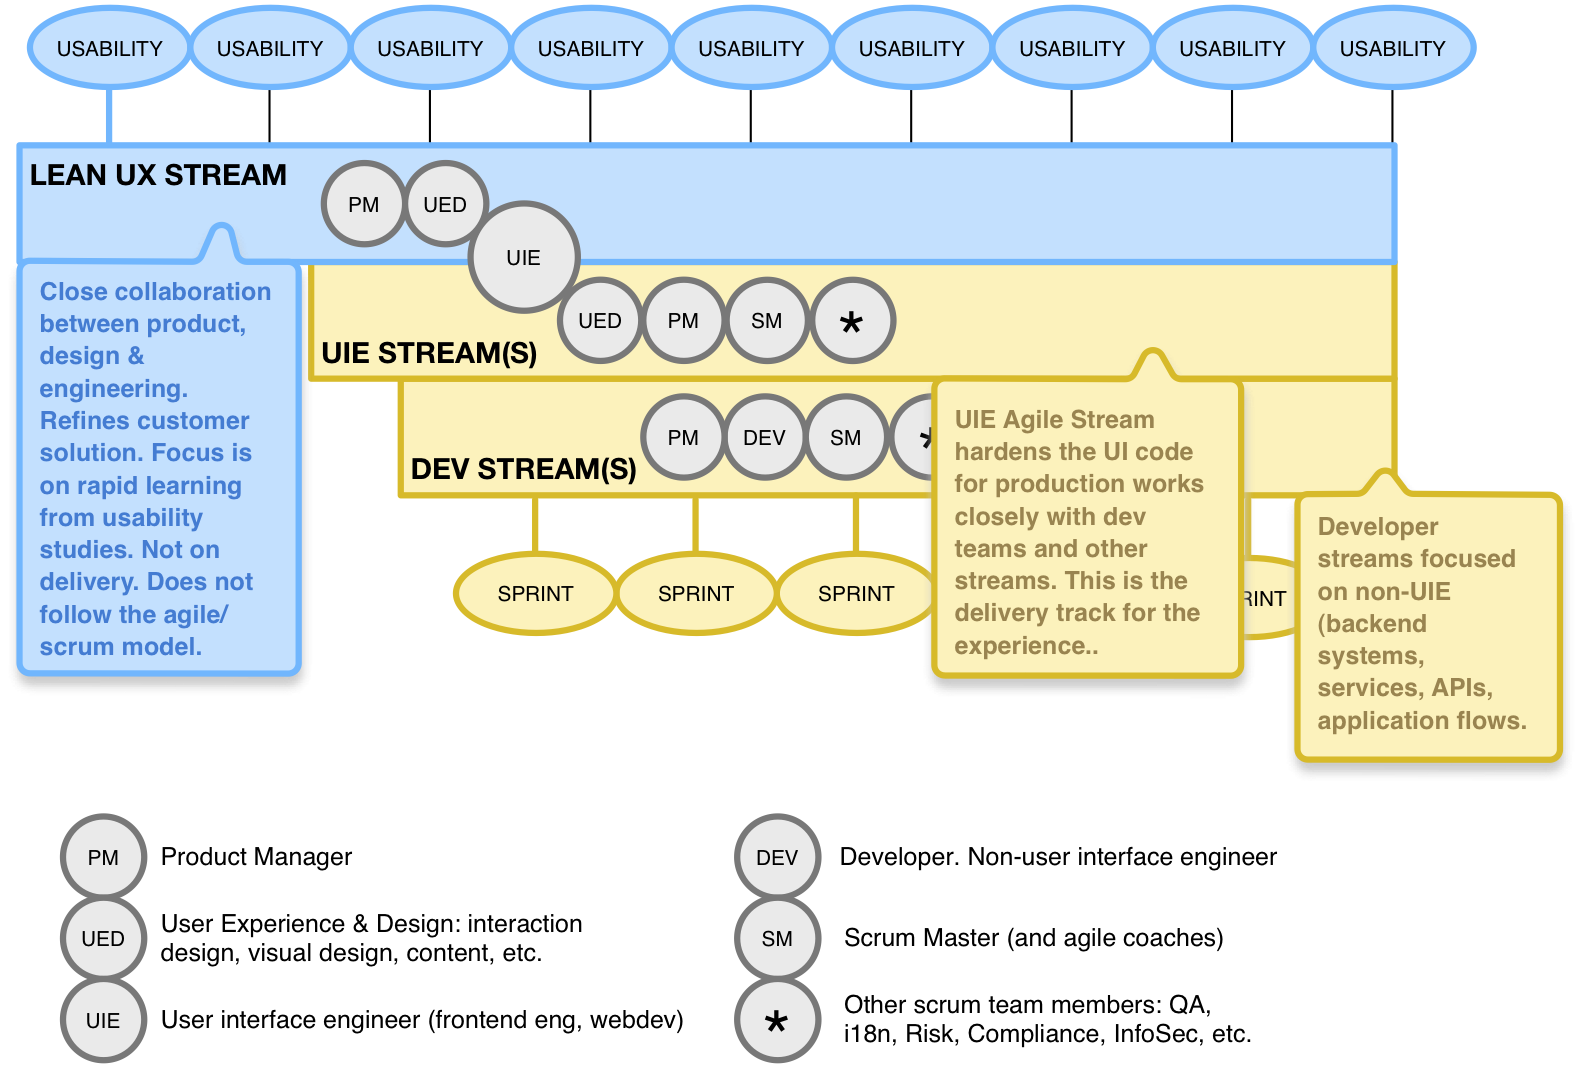 Lean UX & Agile: Two separate but aligned workstreams